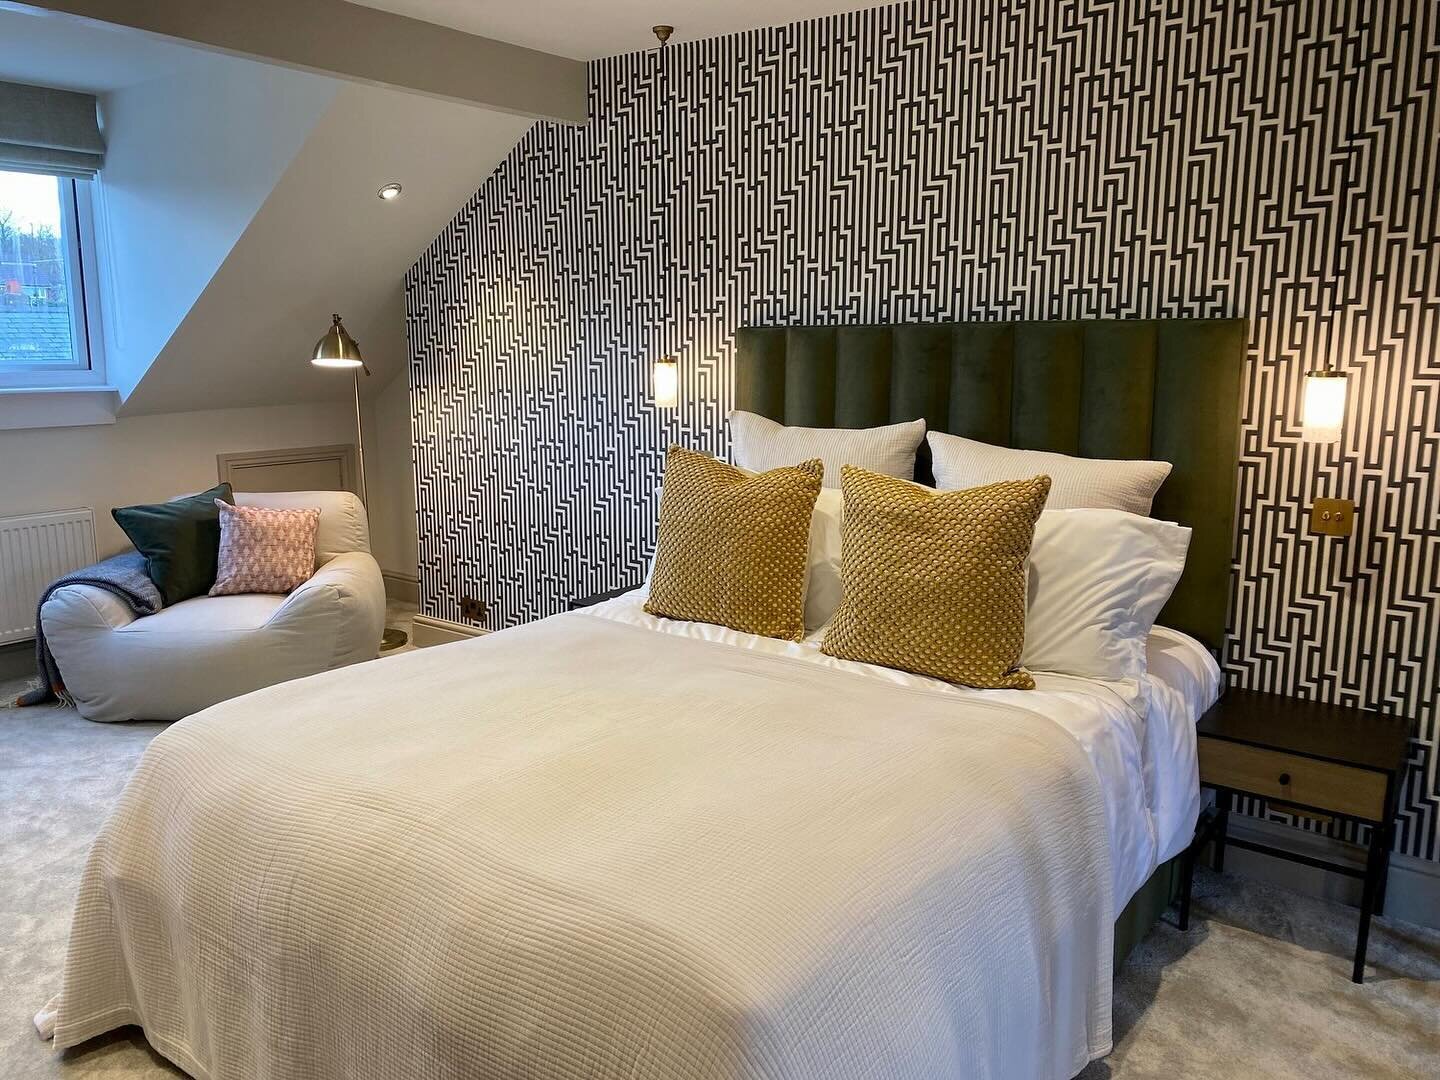 Bedroom to quirky boutique: Embracing contemporary style in every detail 🛏️✨

To discuss your design project, contact hello@heatherkealeyinteriors.co.uk to arrange your complimentary 30-minute discovery call.

#interiordesign #homedecor #designinspi